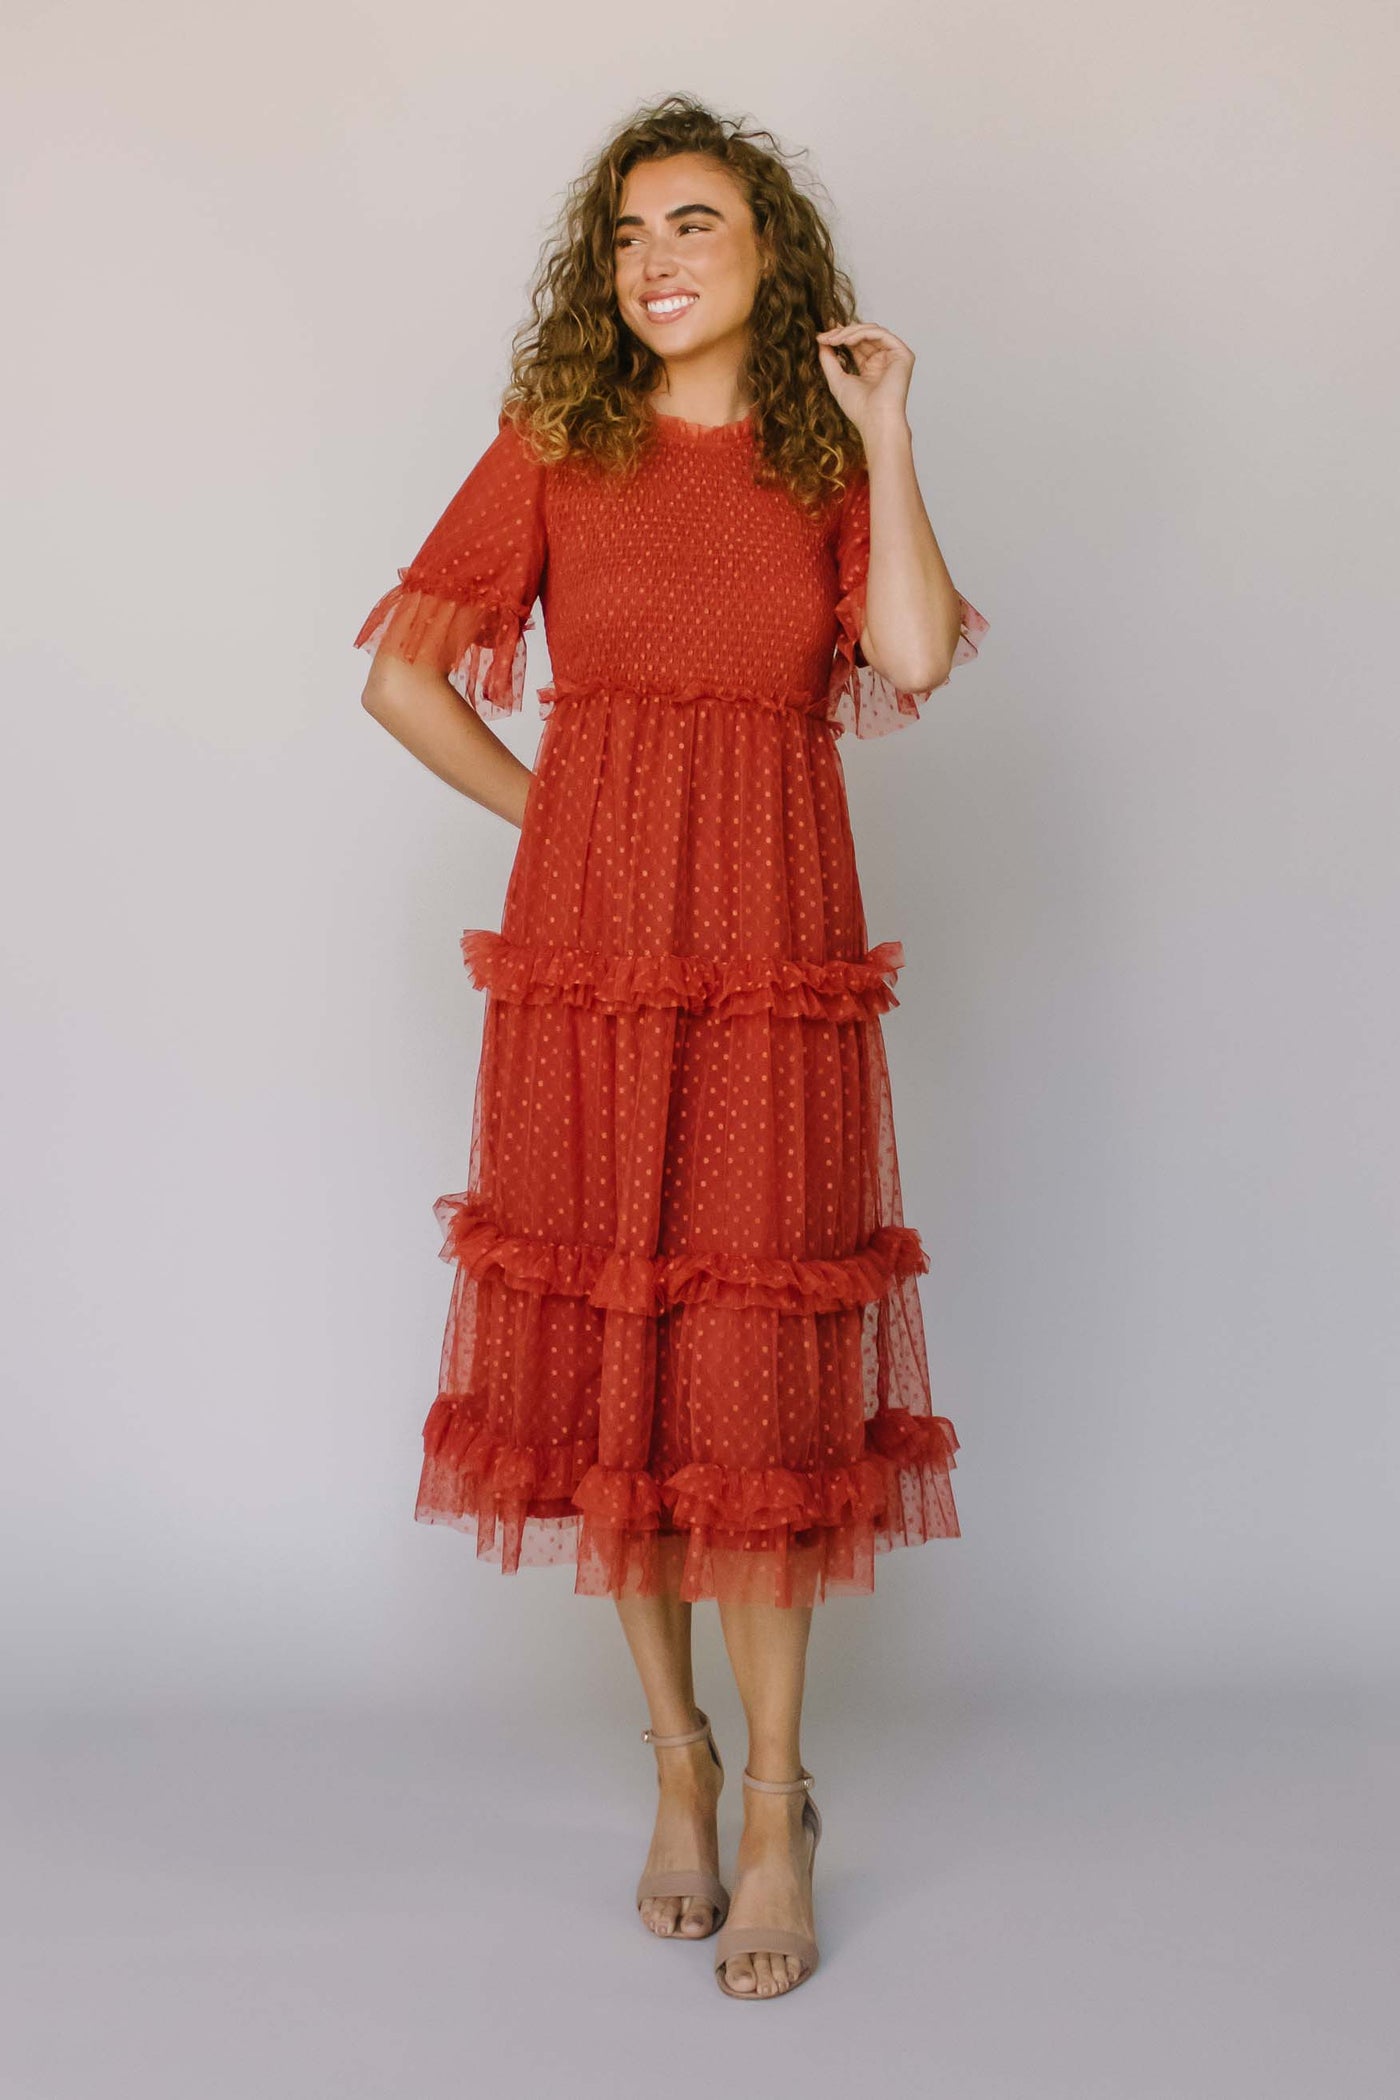 A modest dress with a rust, dotted fabric, flutter sleeves, fluffy tiers, and a smocked bodice. It also has a higher neckline.